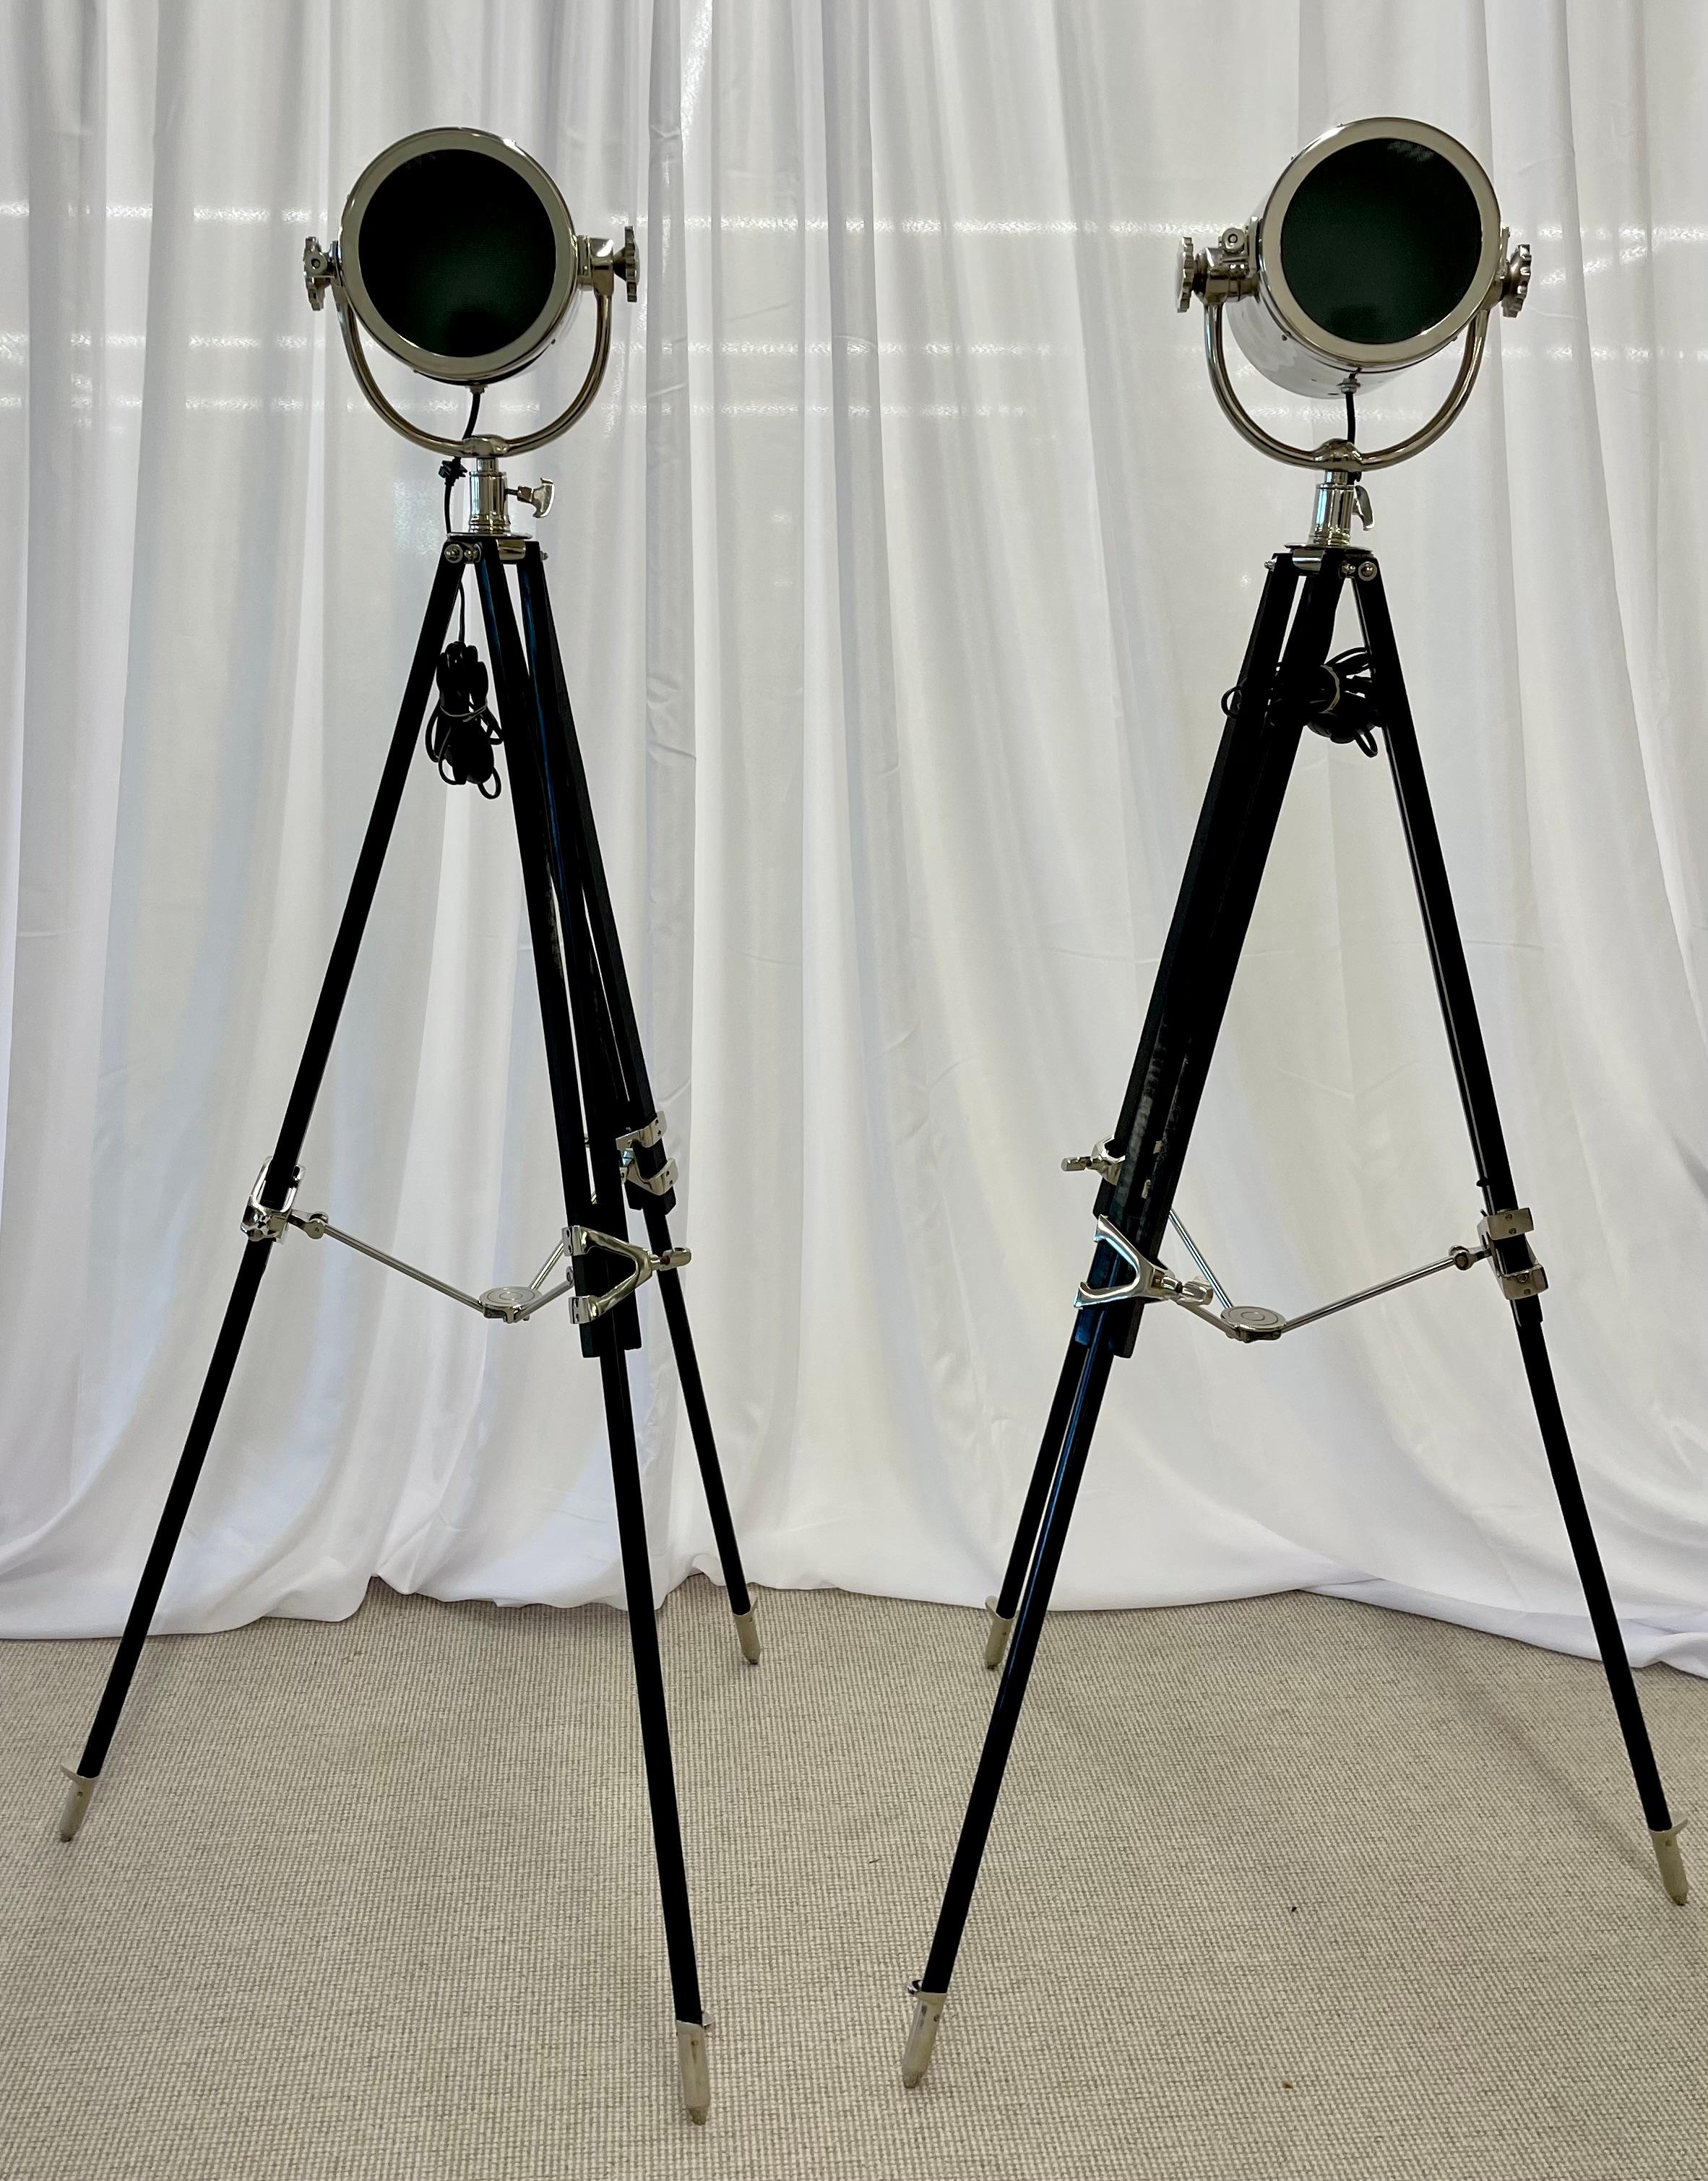 Pair of Art Deco Chrome spotlight floor lamps on Ebony Tripod bases

Pair of Art Deco chrome spotlight floor lamps on ebony tripod adjustable bases with adjustable upper extension. The light itself measures 8